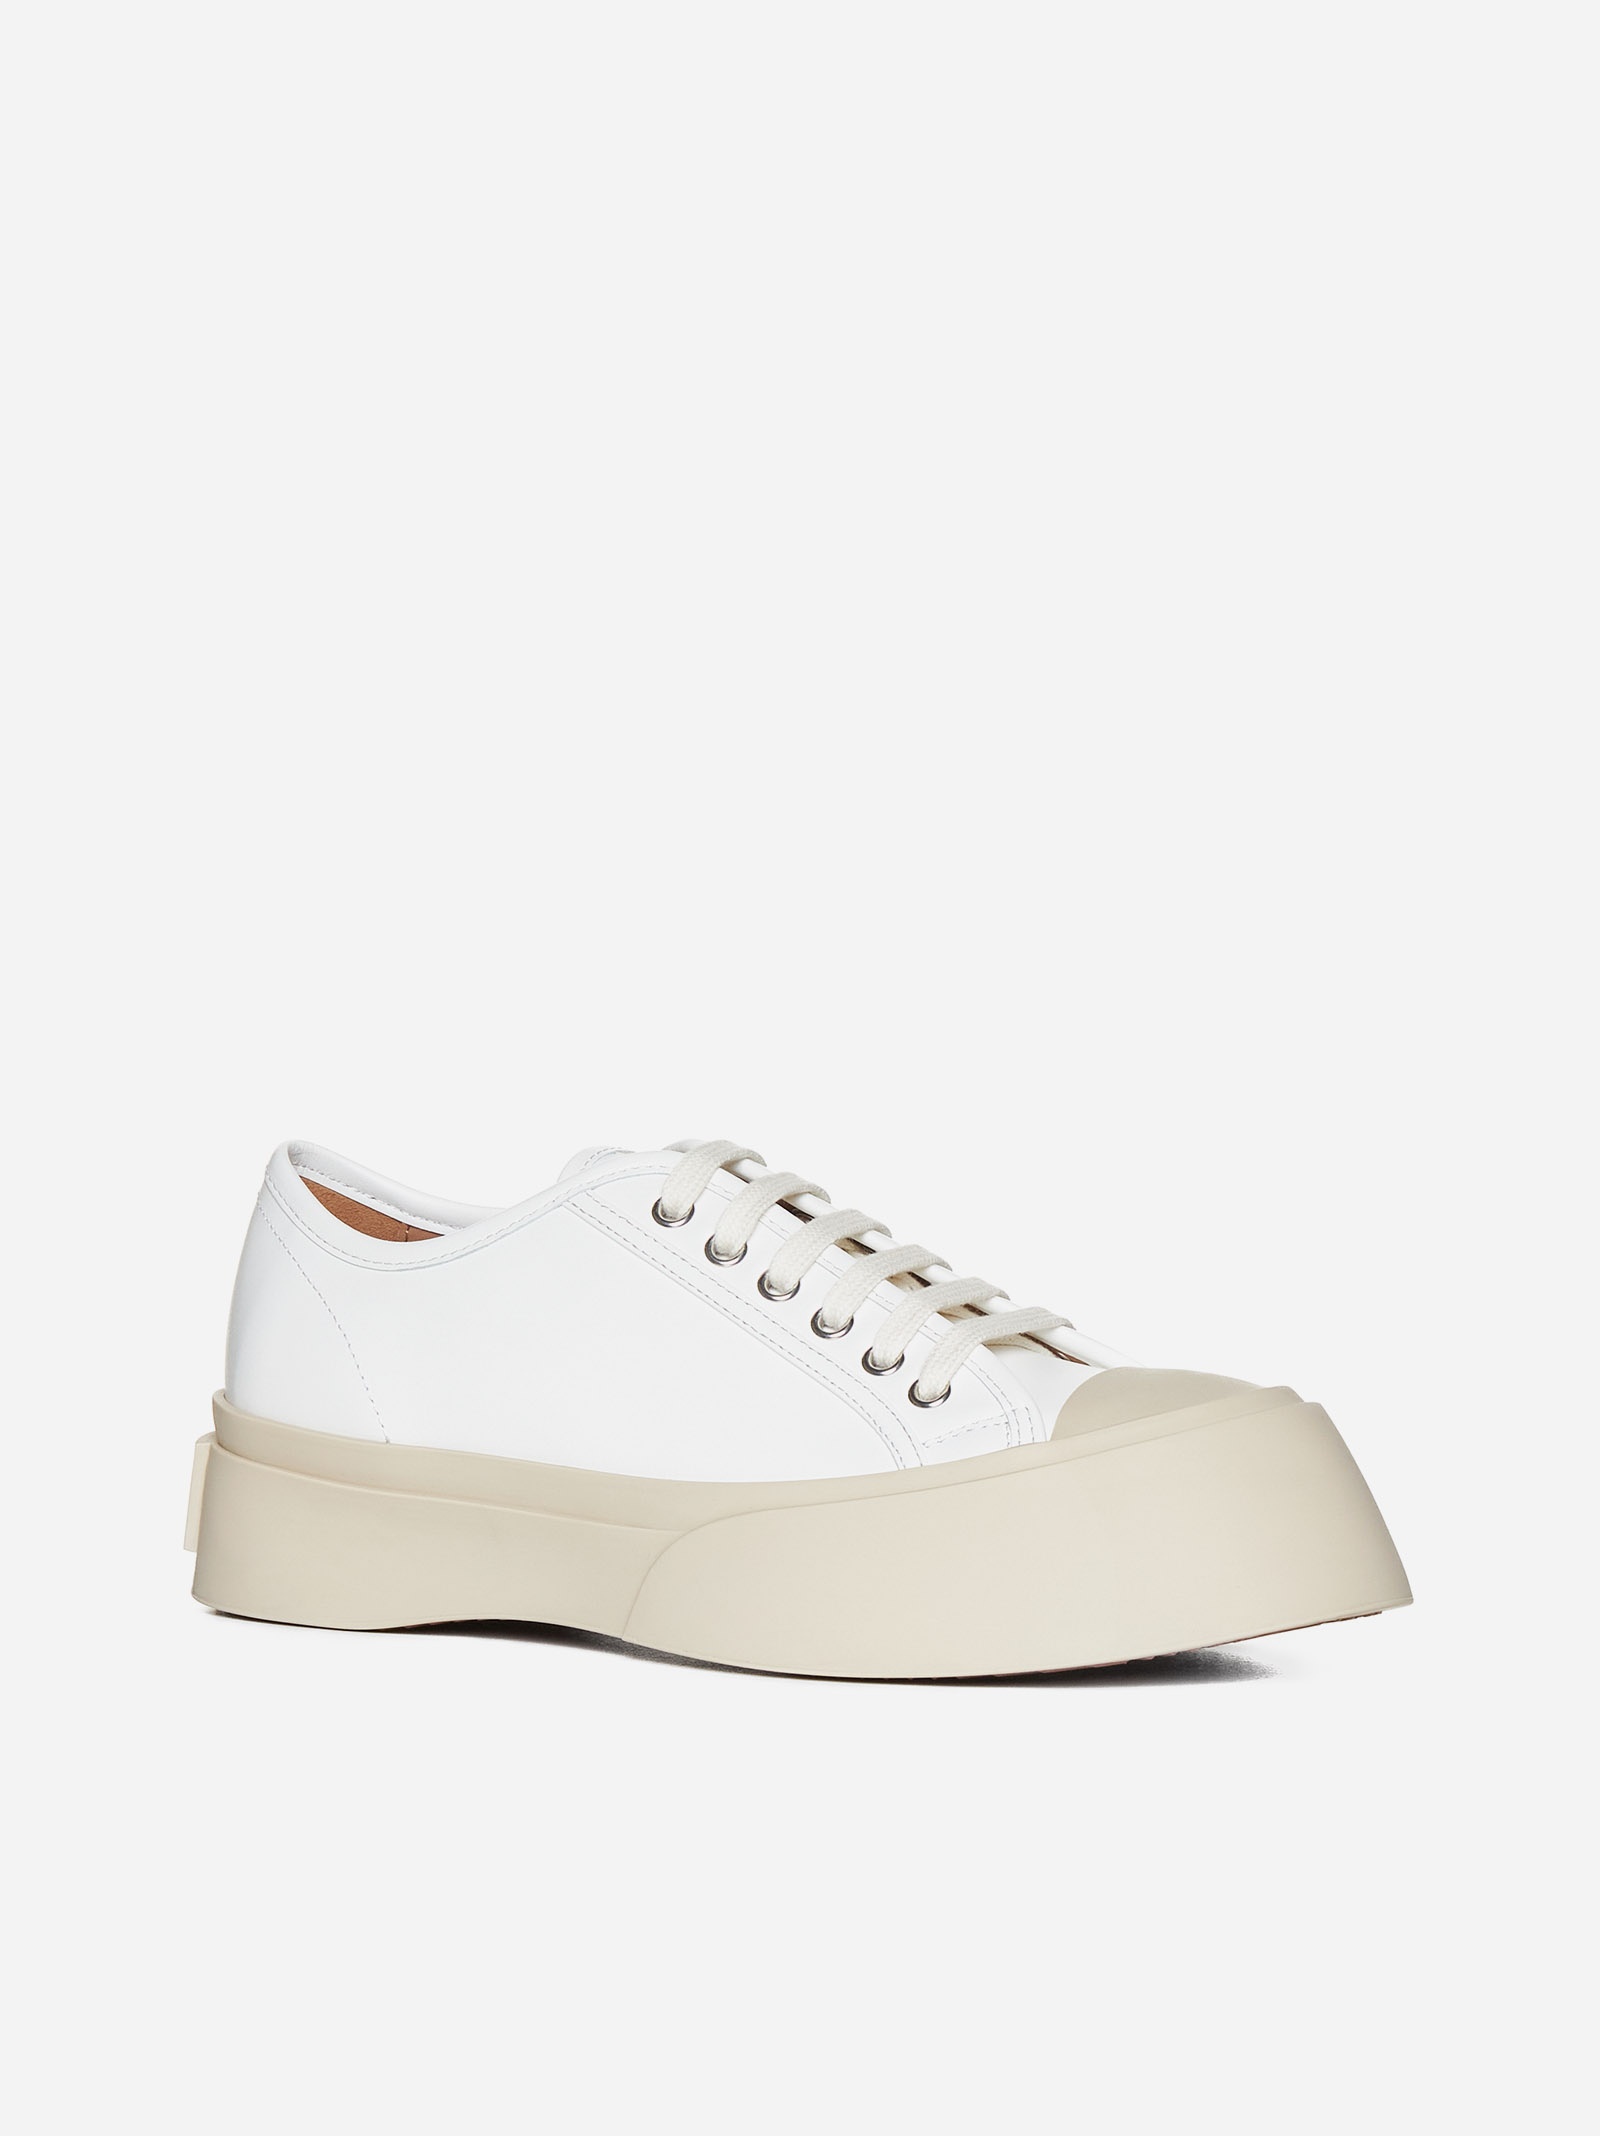 Pablo leather sneakers - 2